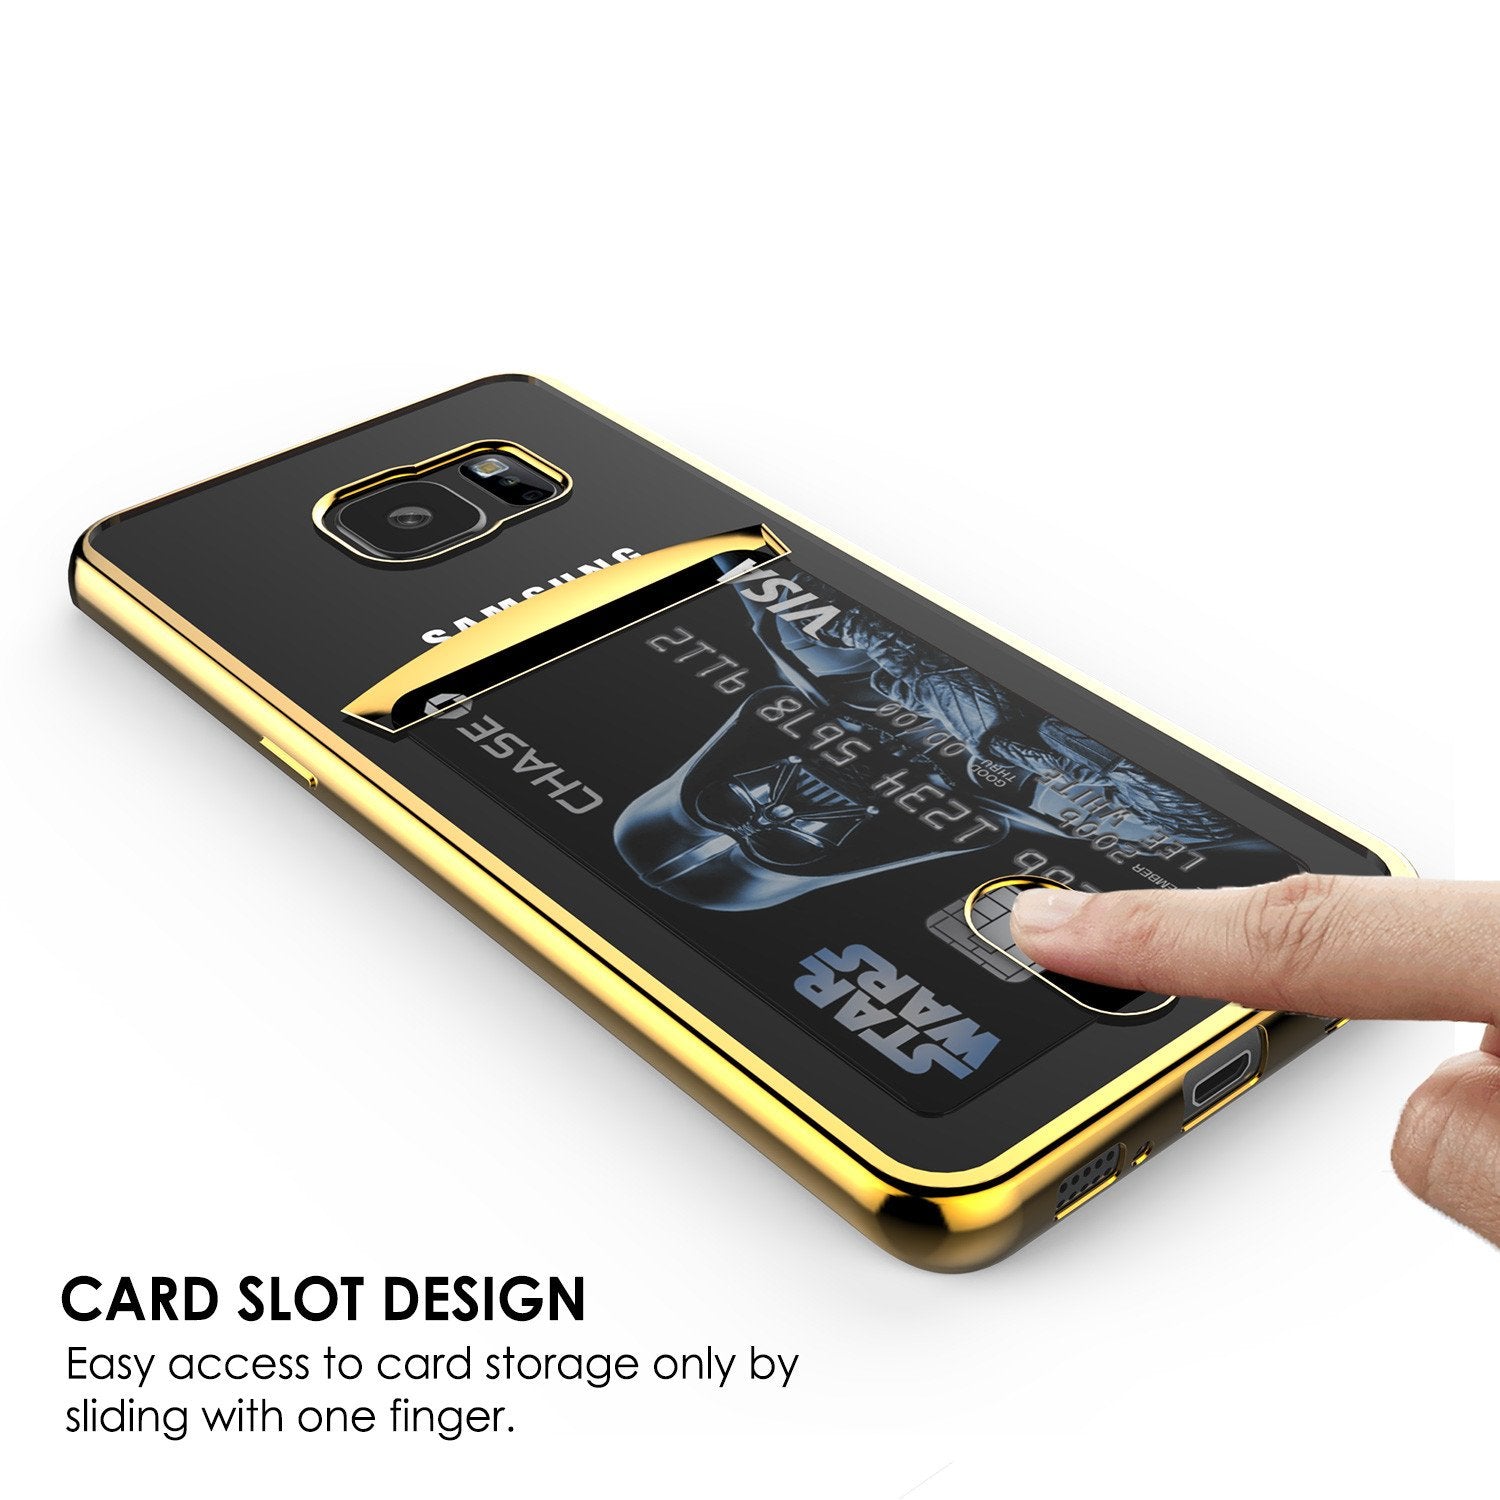 Galaxy S7 EDGE Case, PUNKCASE® LUCID Gold Series | Card Slot | SHIELD Screen Protector | Ultra fit